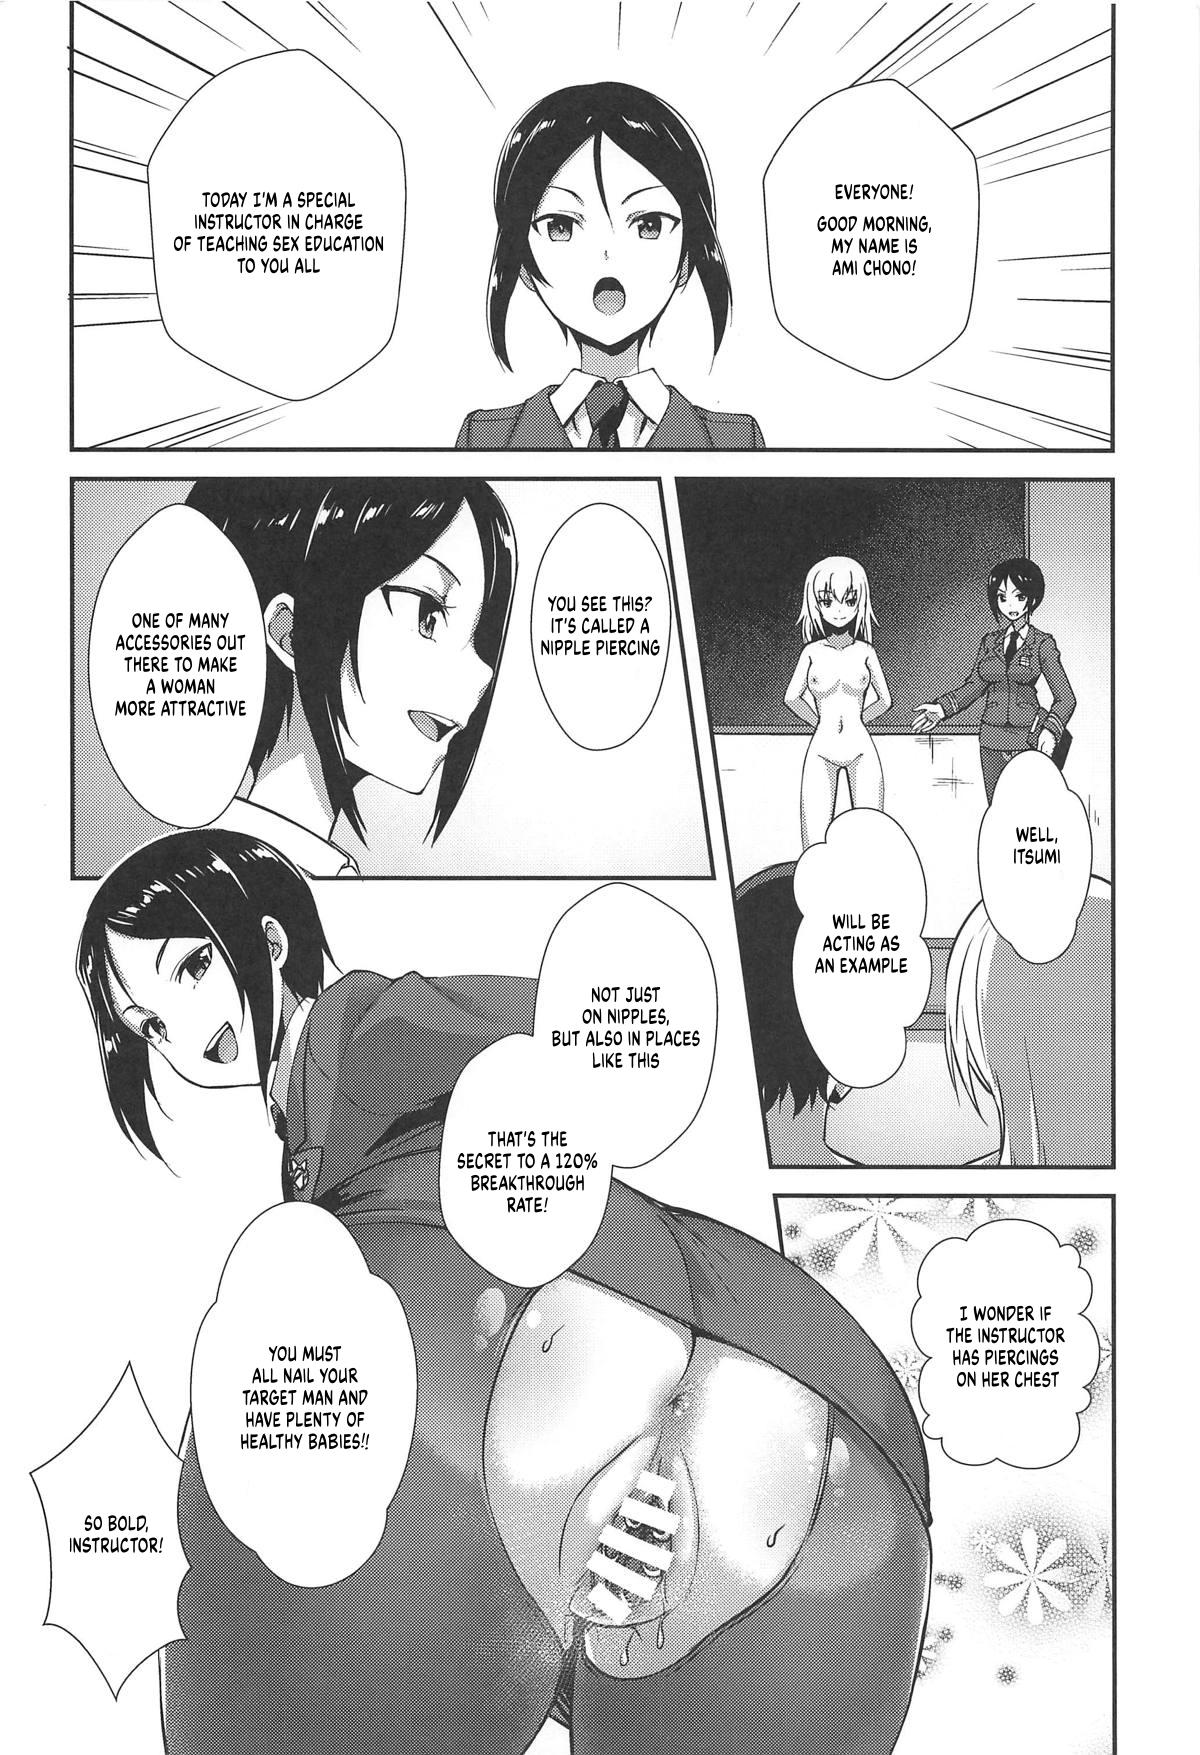 The Way How a Matriarch is Brought Up - Maho's Case, Bottom 13